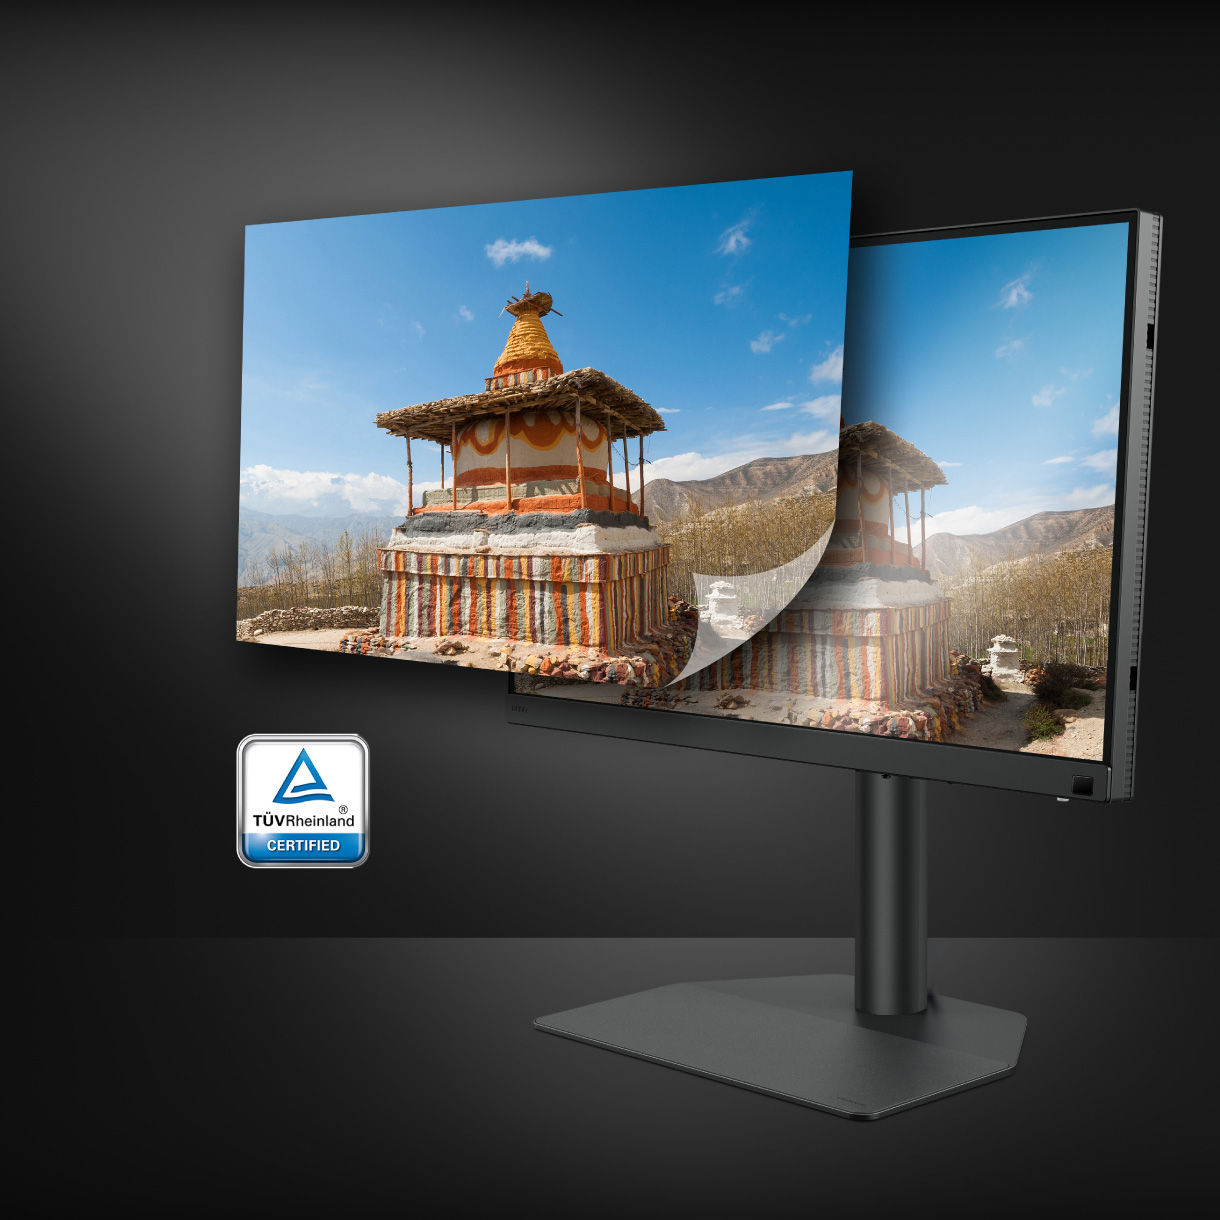 BenQ SW242Q utilizes Fine-Coated anti-reflection panel to eliminate glare and reflection for simulated paper-texture visual experiences on screen under different types of ambient lighting to get perfect results.